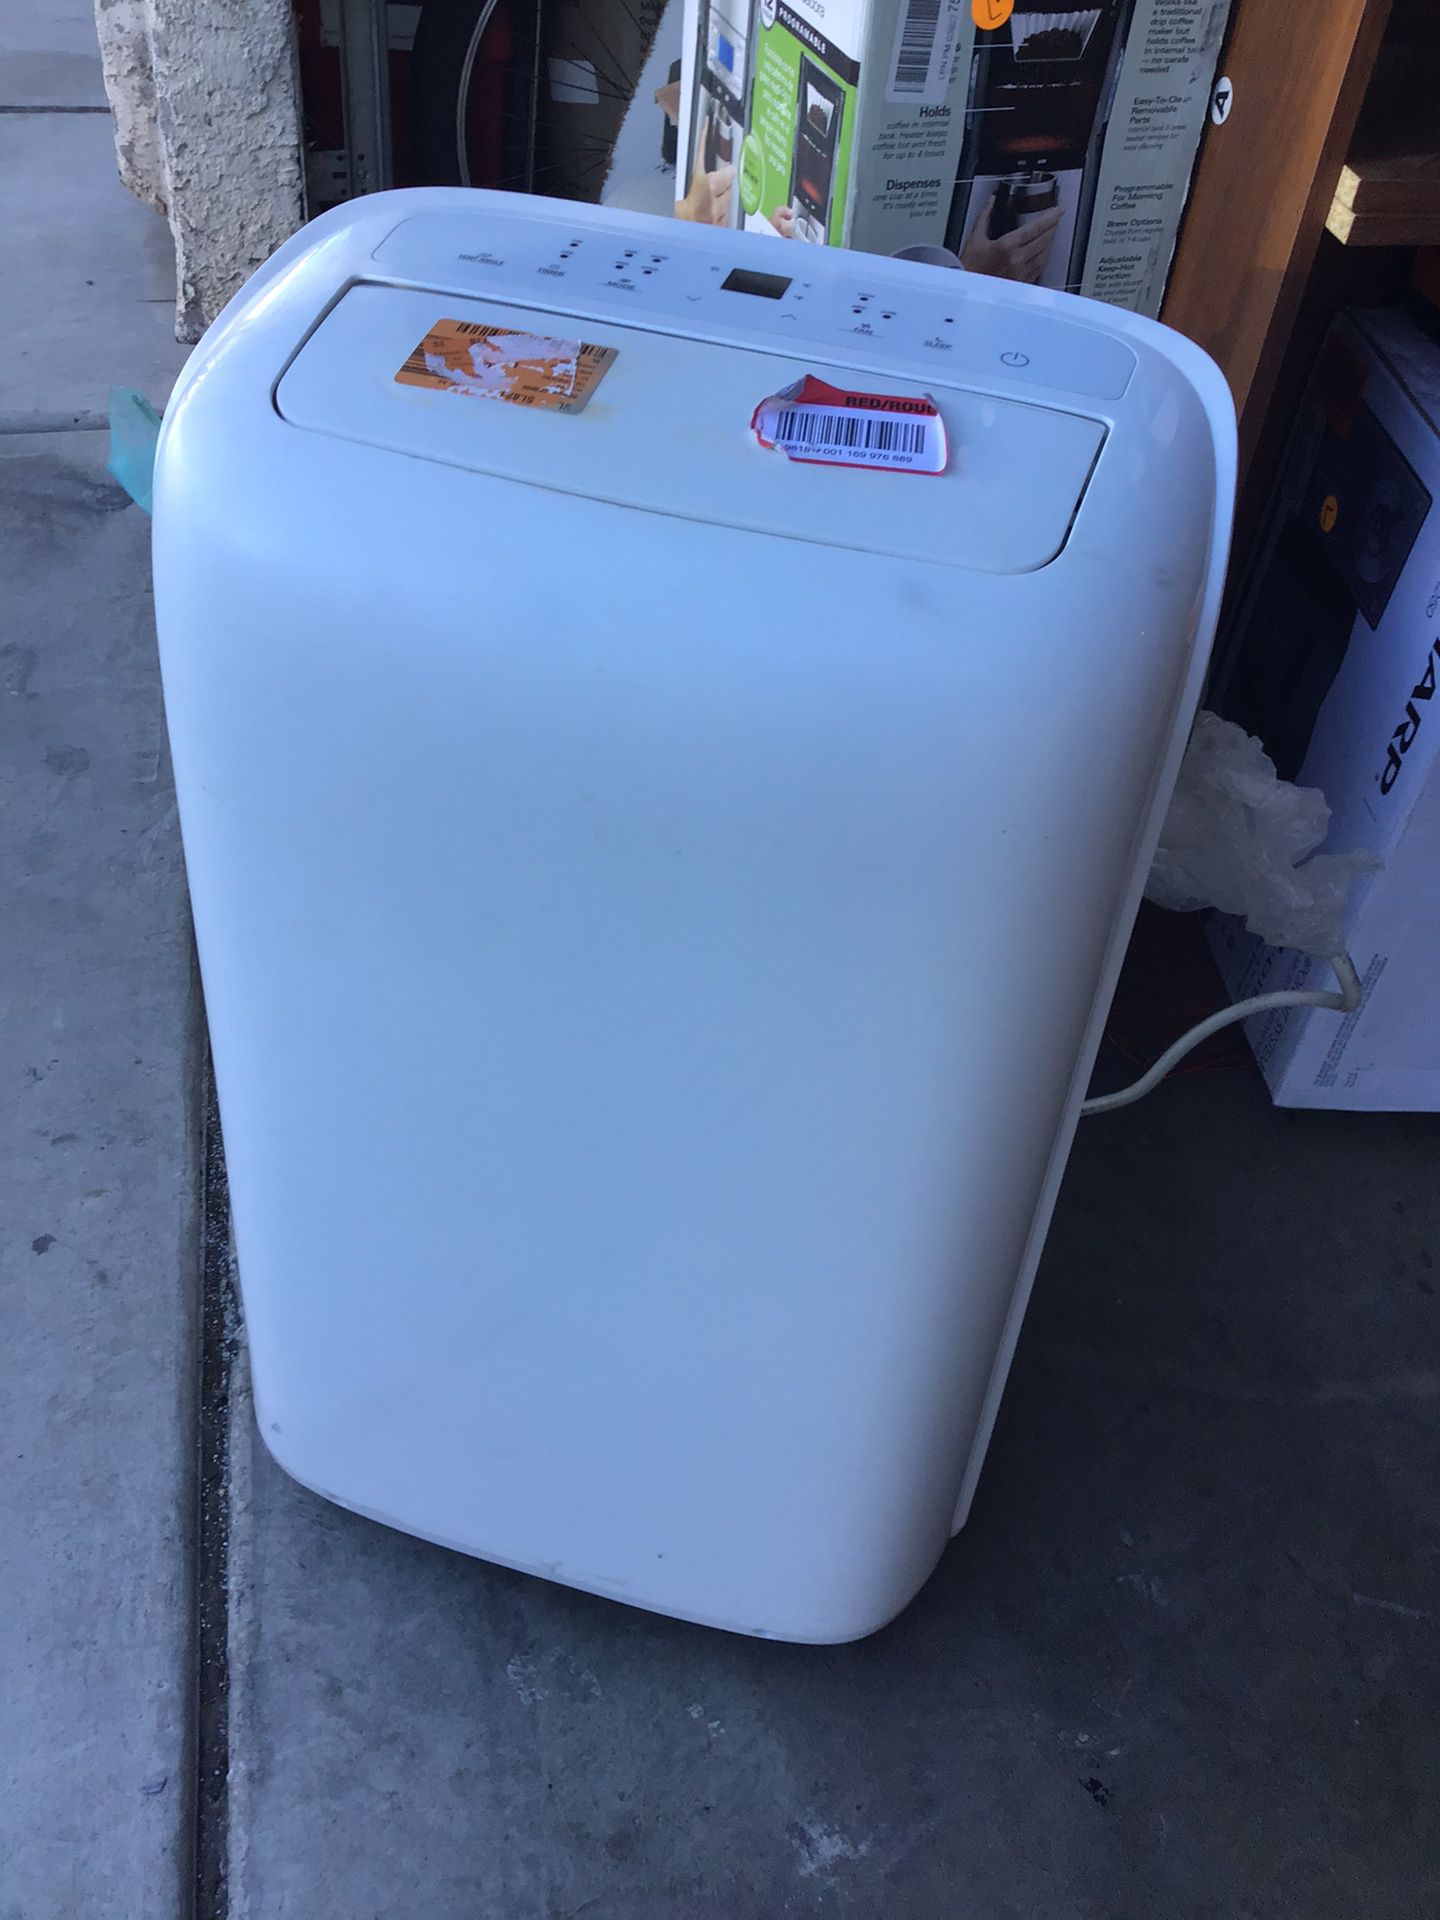 Toshiba 10,000 BTU portable air conditioner excellent working condition open box never used comes with the hose window assembly